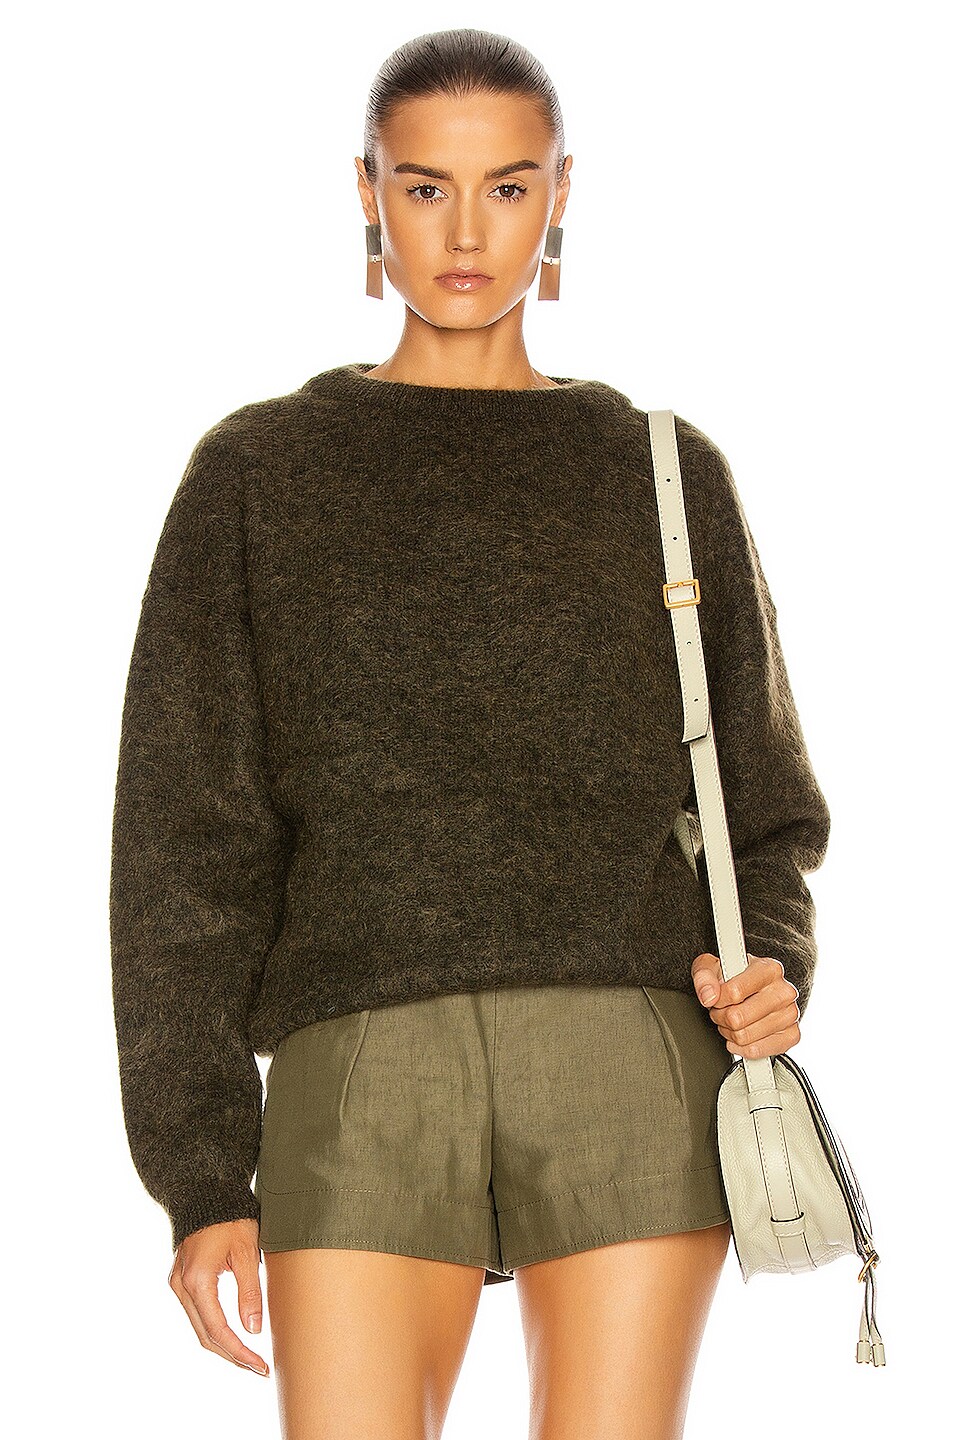 Acne Studios Dramatic Mohair Sweater in Olive Green | FWRD